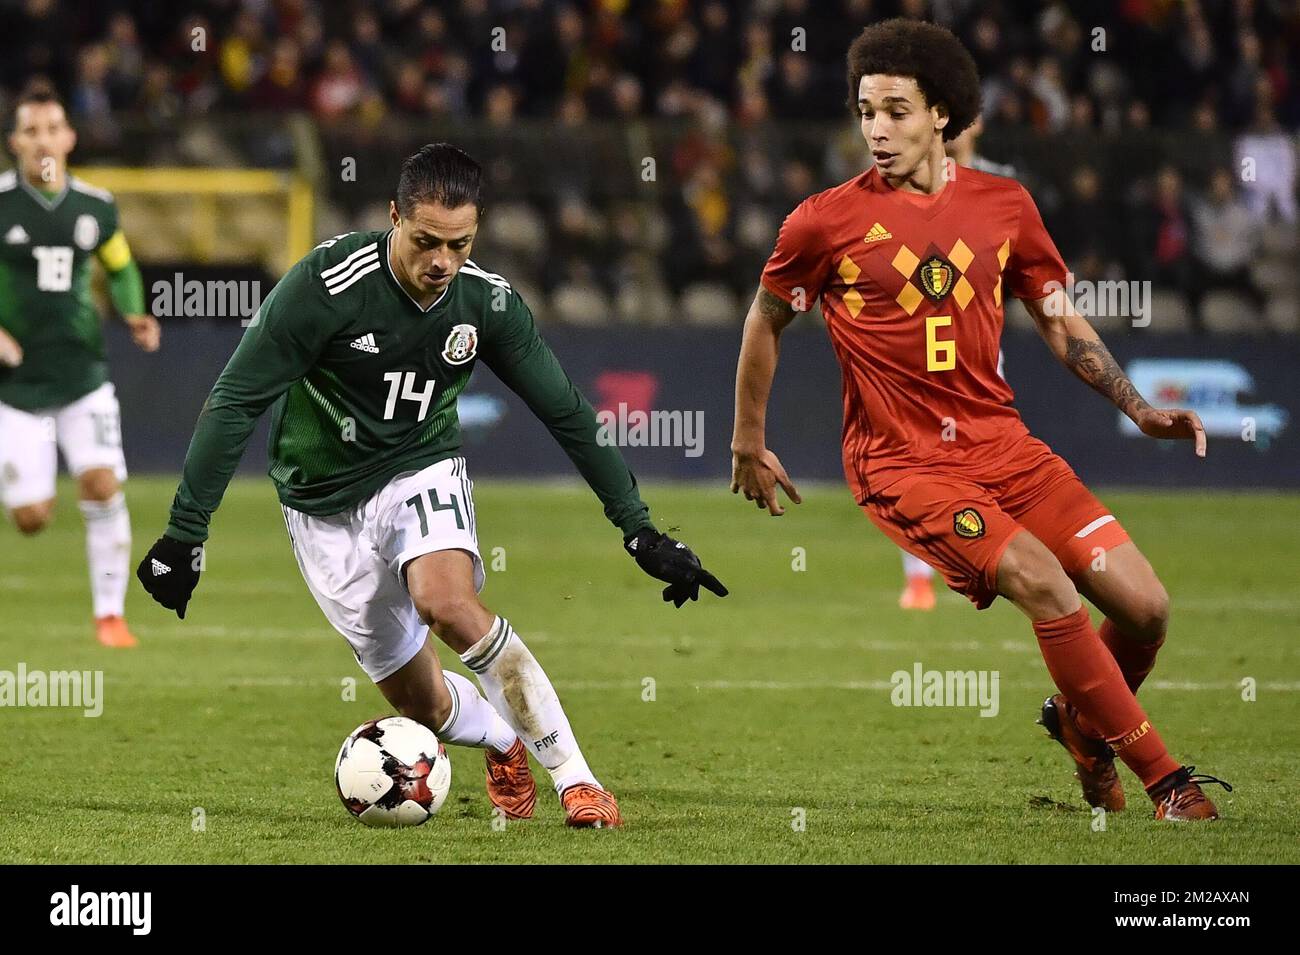 Mexico's Javier Hernandez 'Chicharito' and Belgium's Axel Witsel pictured in action during a friendly soccer game between Belgian national team Red Devils and Mexico, Friday 10 November 2017, in Brugge. BELGA PHOTO DIRK WAEM  Stock Photo